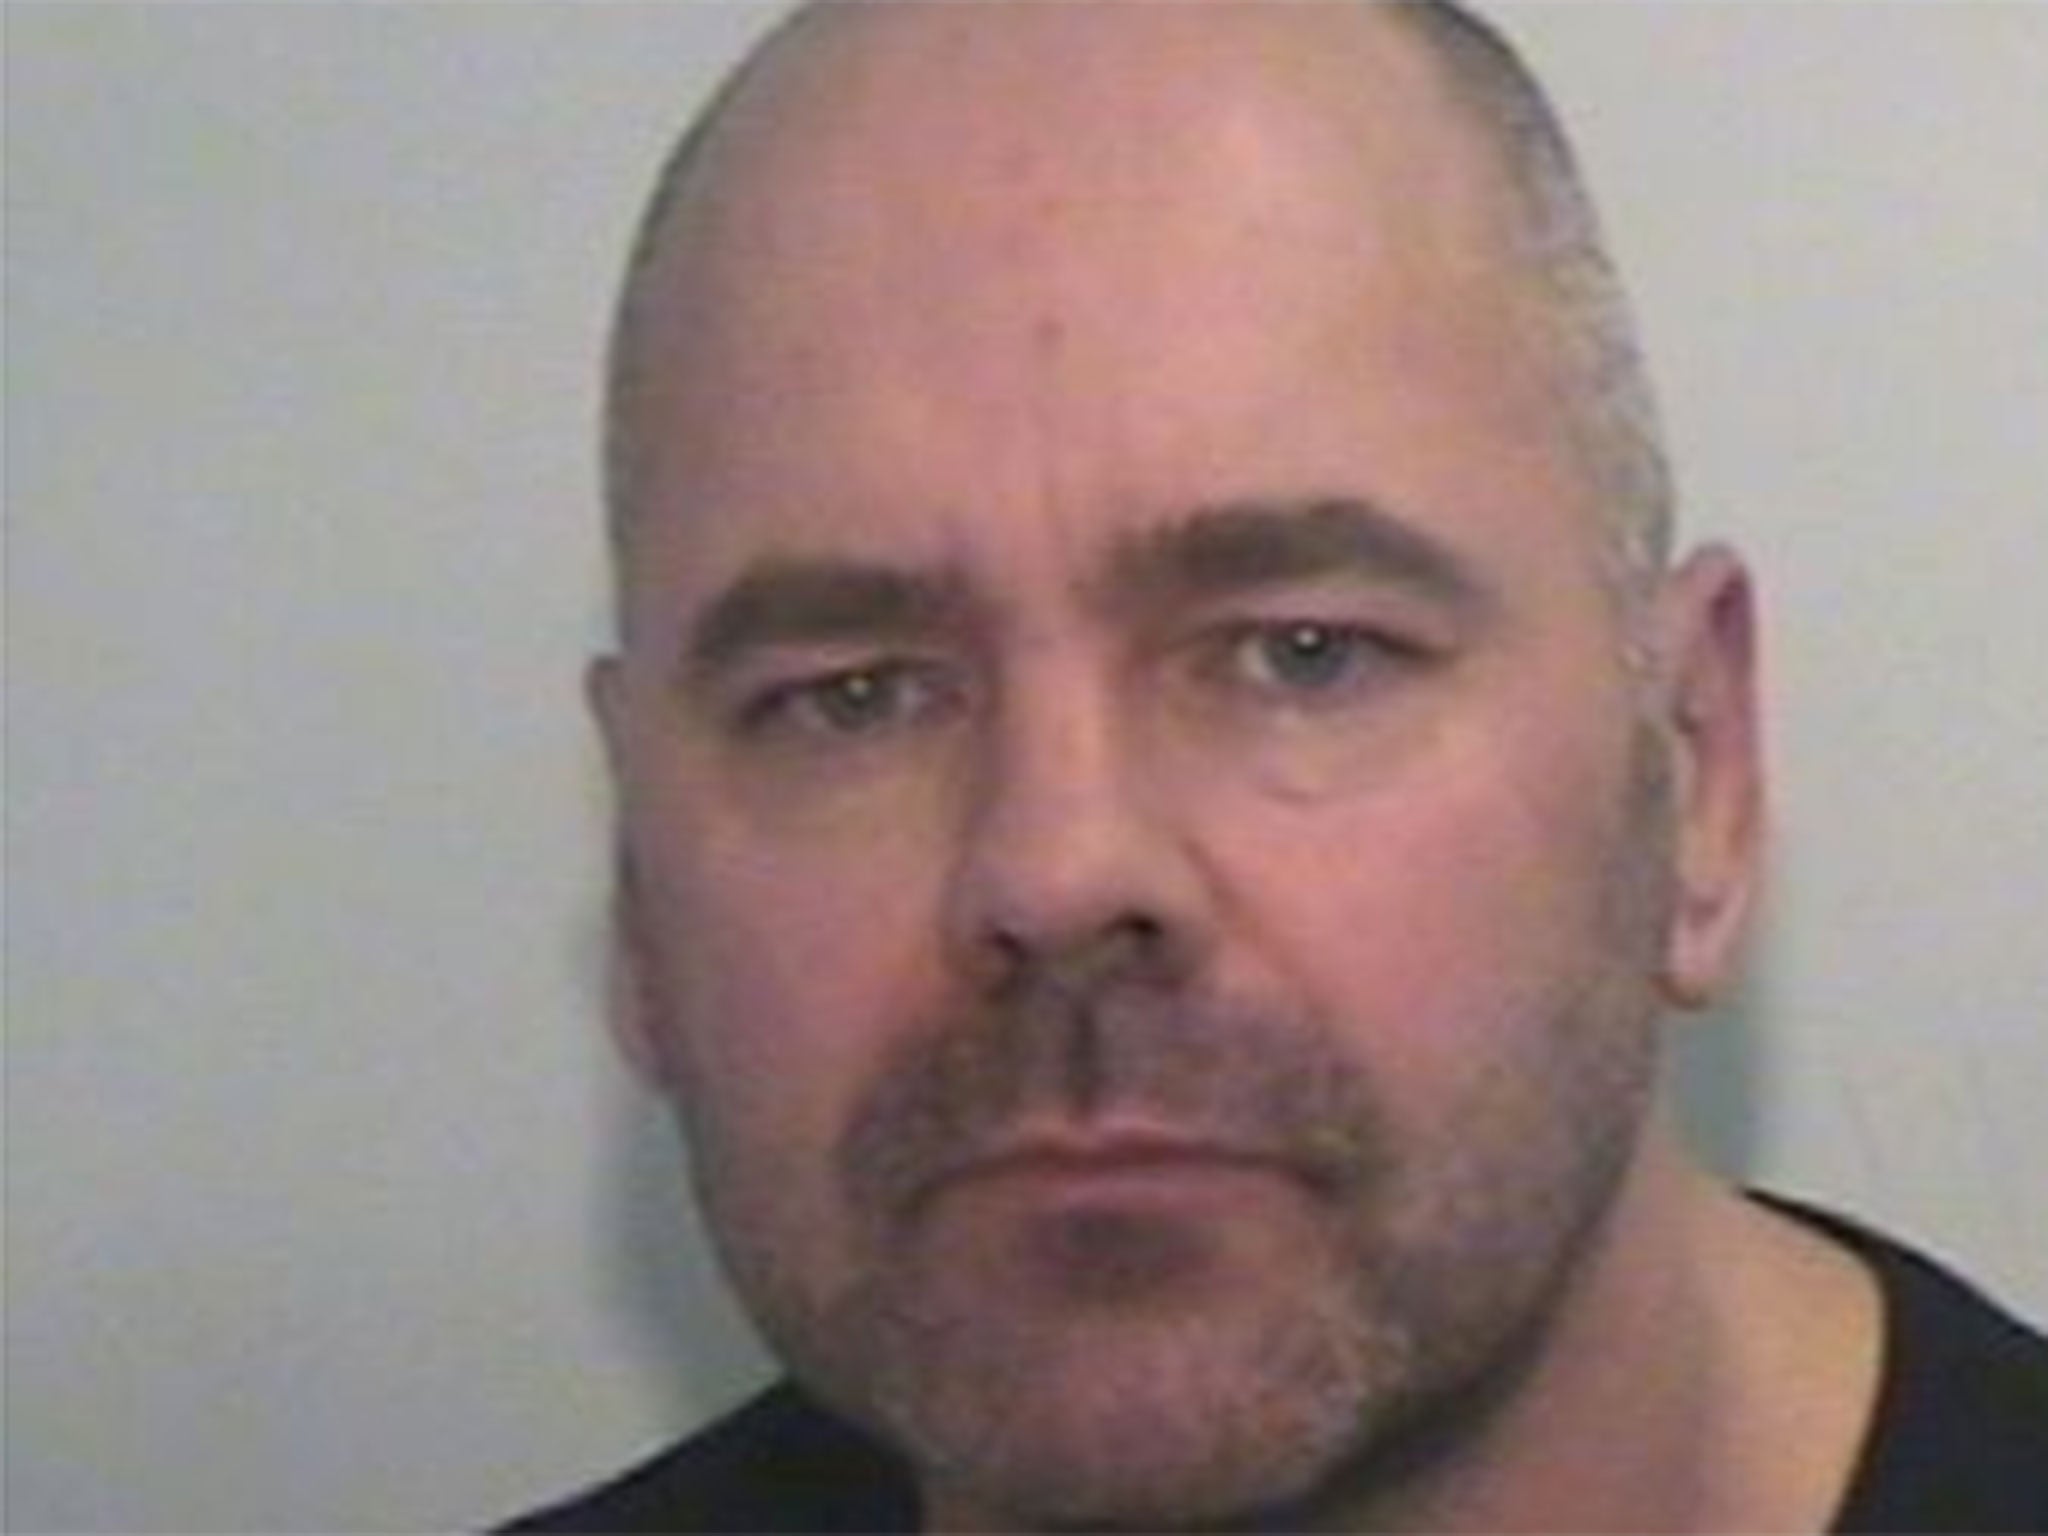 Greater Manchester Police said Stephen Archer is 'obsessed' with petrol